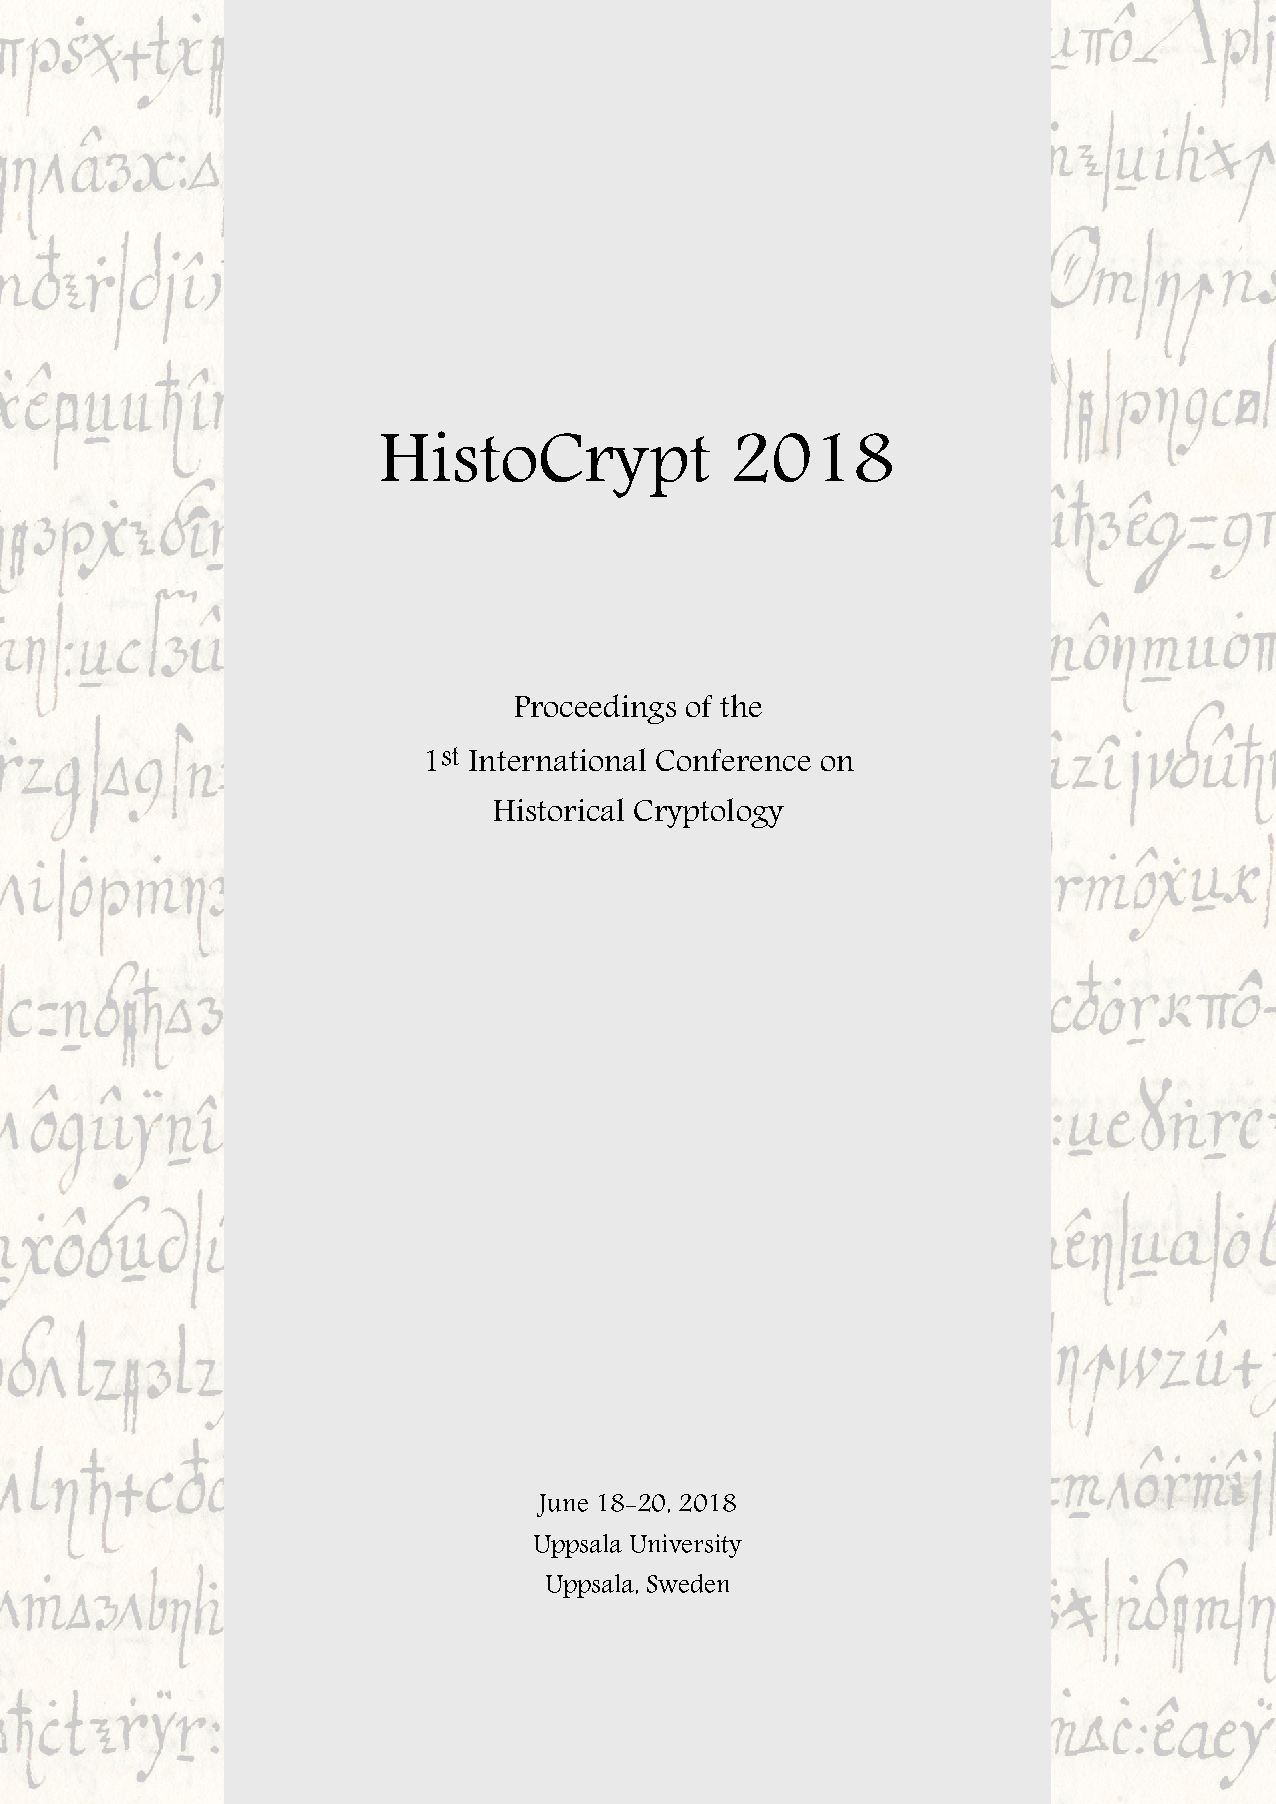 					View Proceedings of the 1st International Conference on Historical Cryptology HistoCrypt 2018
				